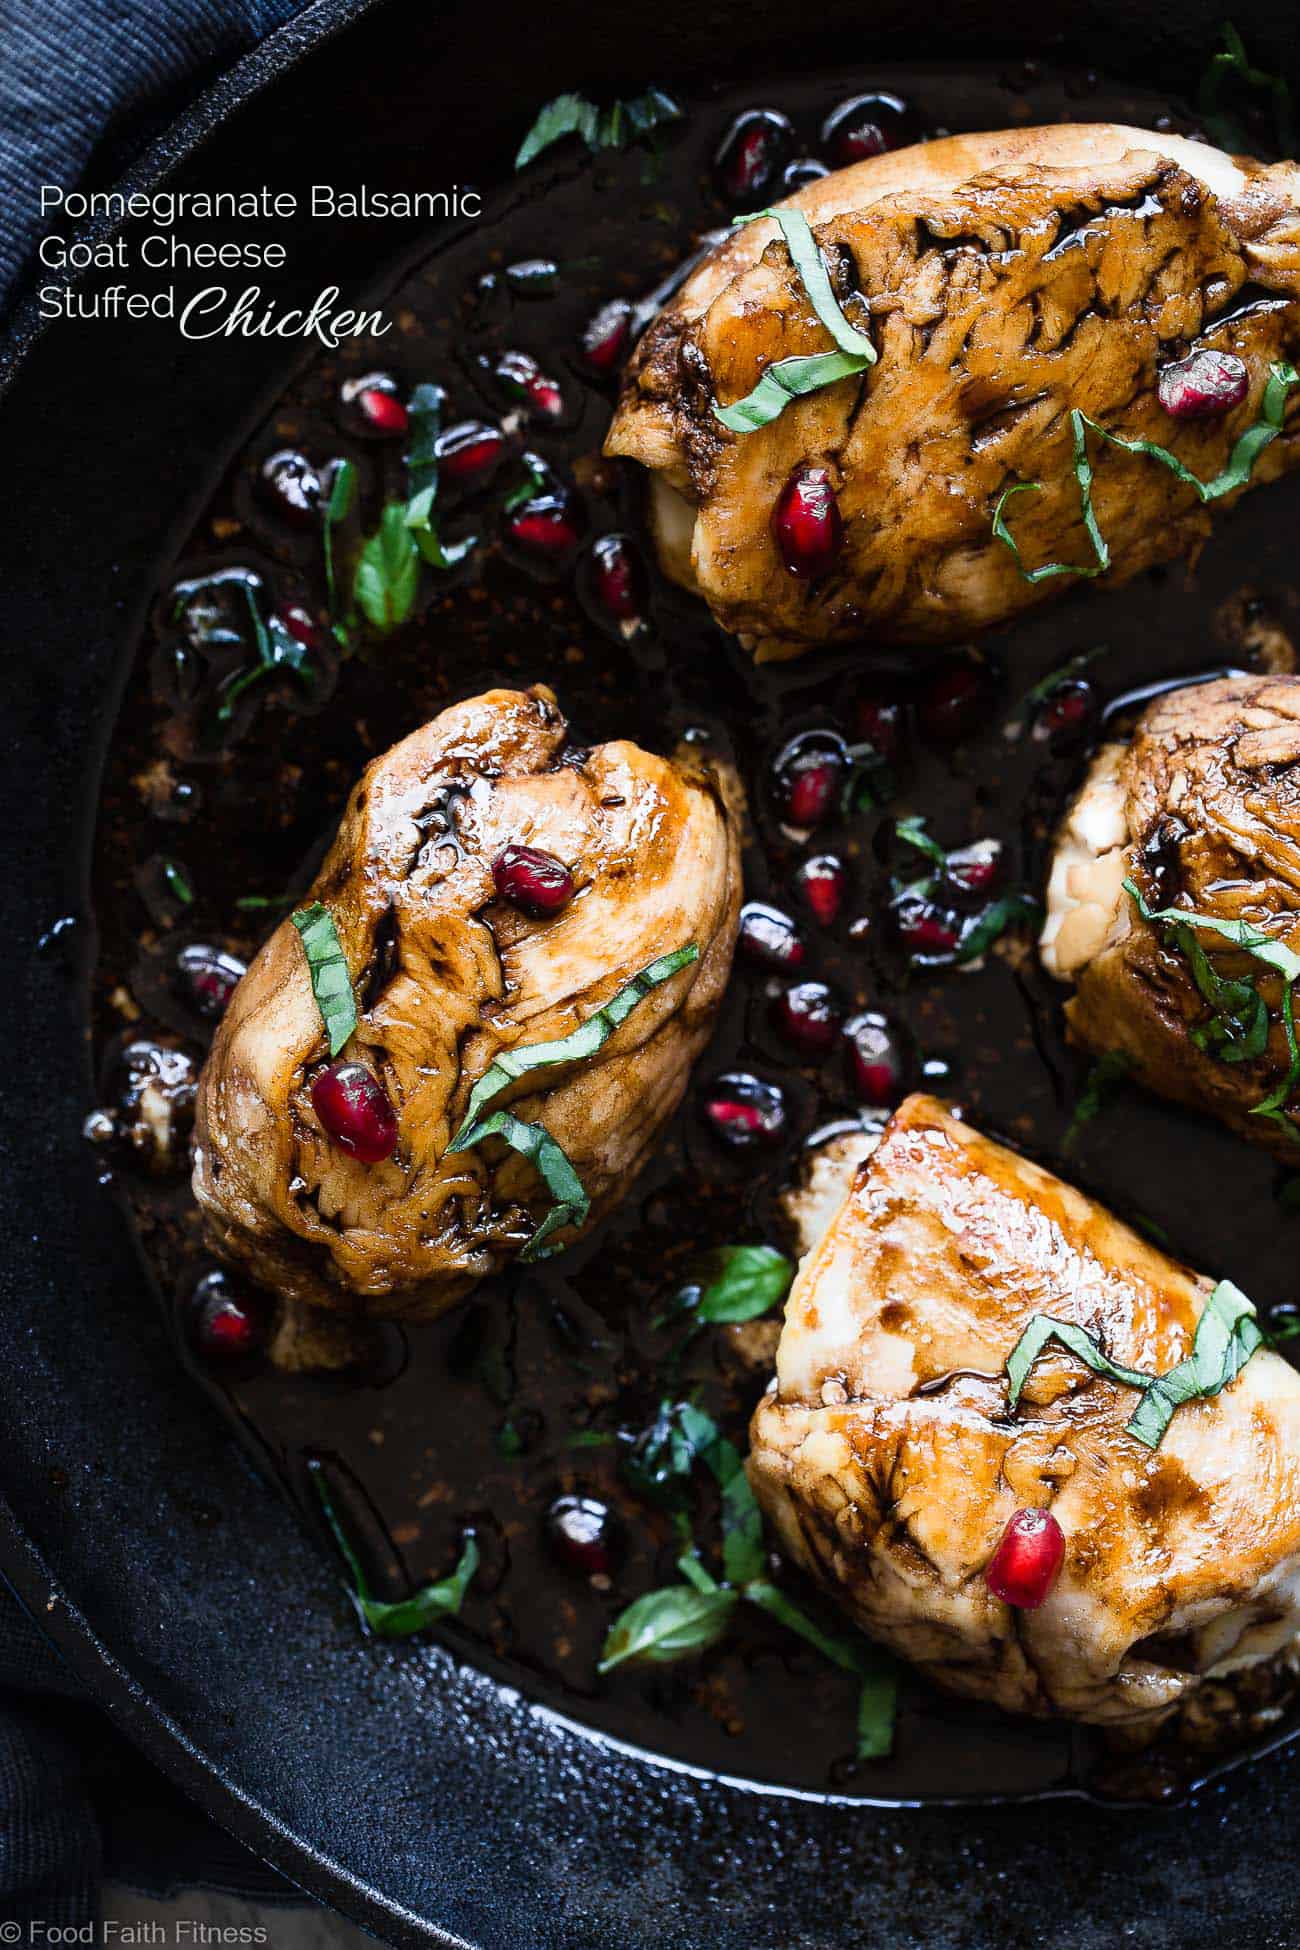 Balsamic Pomegranate Goat Cheese Stuffed Chicken - A  healthy and gluten free dinner, loaded with superfoods! Both picky husbands and kids love this dinner and it feels like a fancy restaurant but is quick and easy enough for weeknights! | Foodfaithfitness.com | @FoodFaithFit